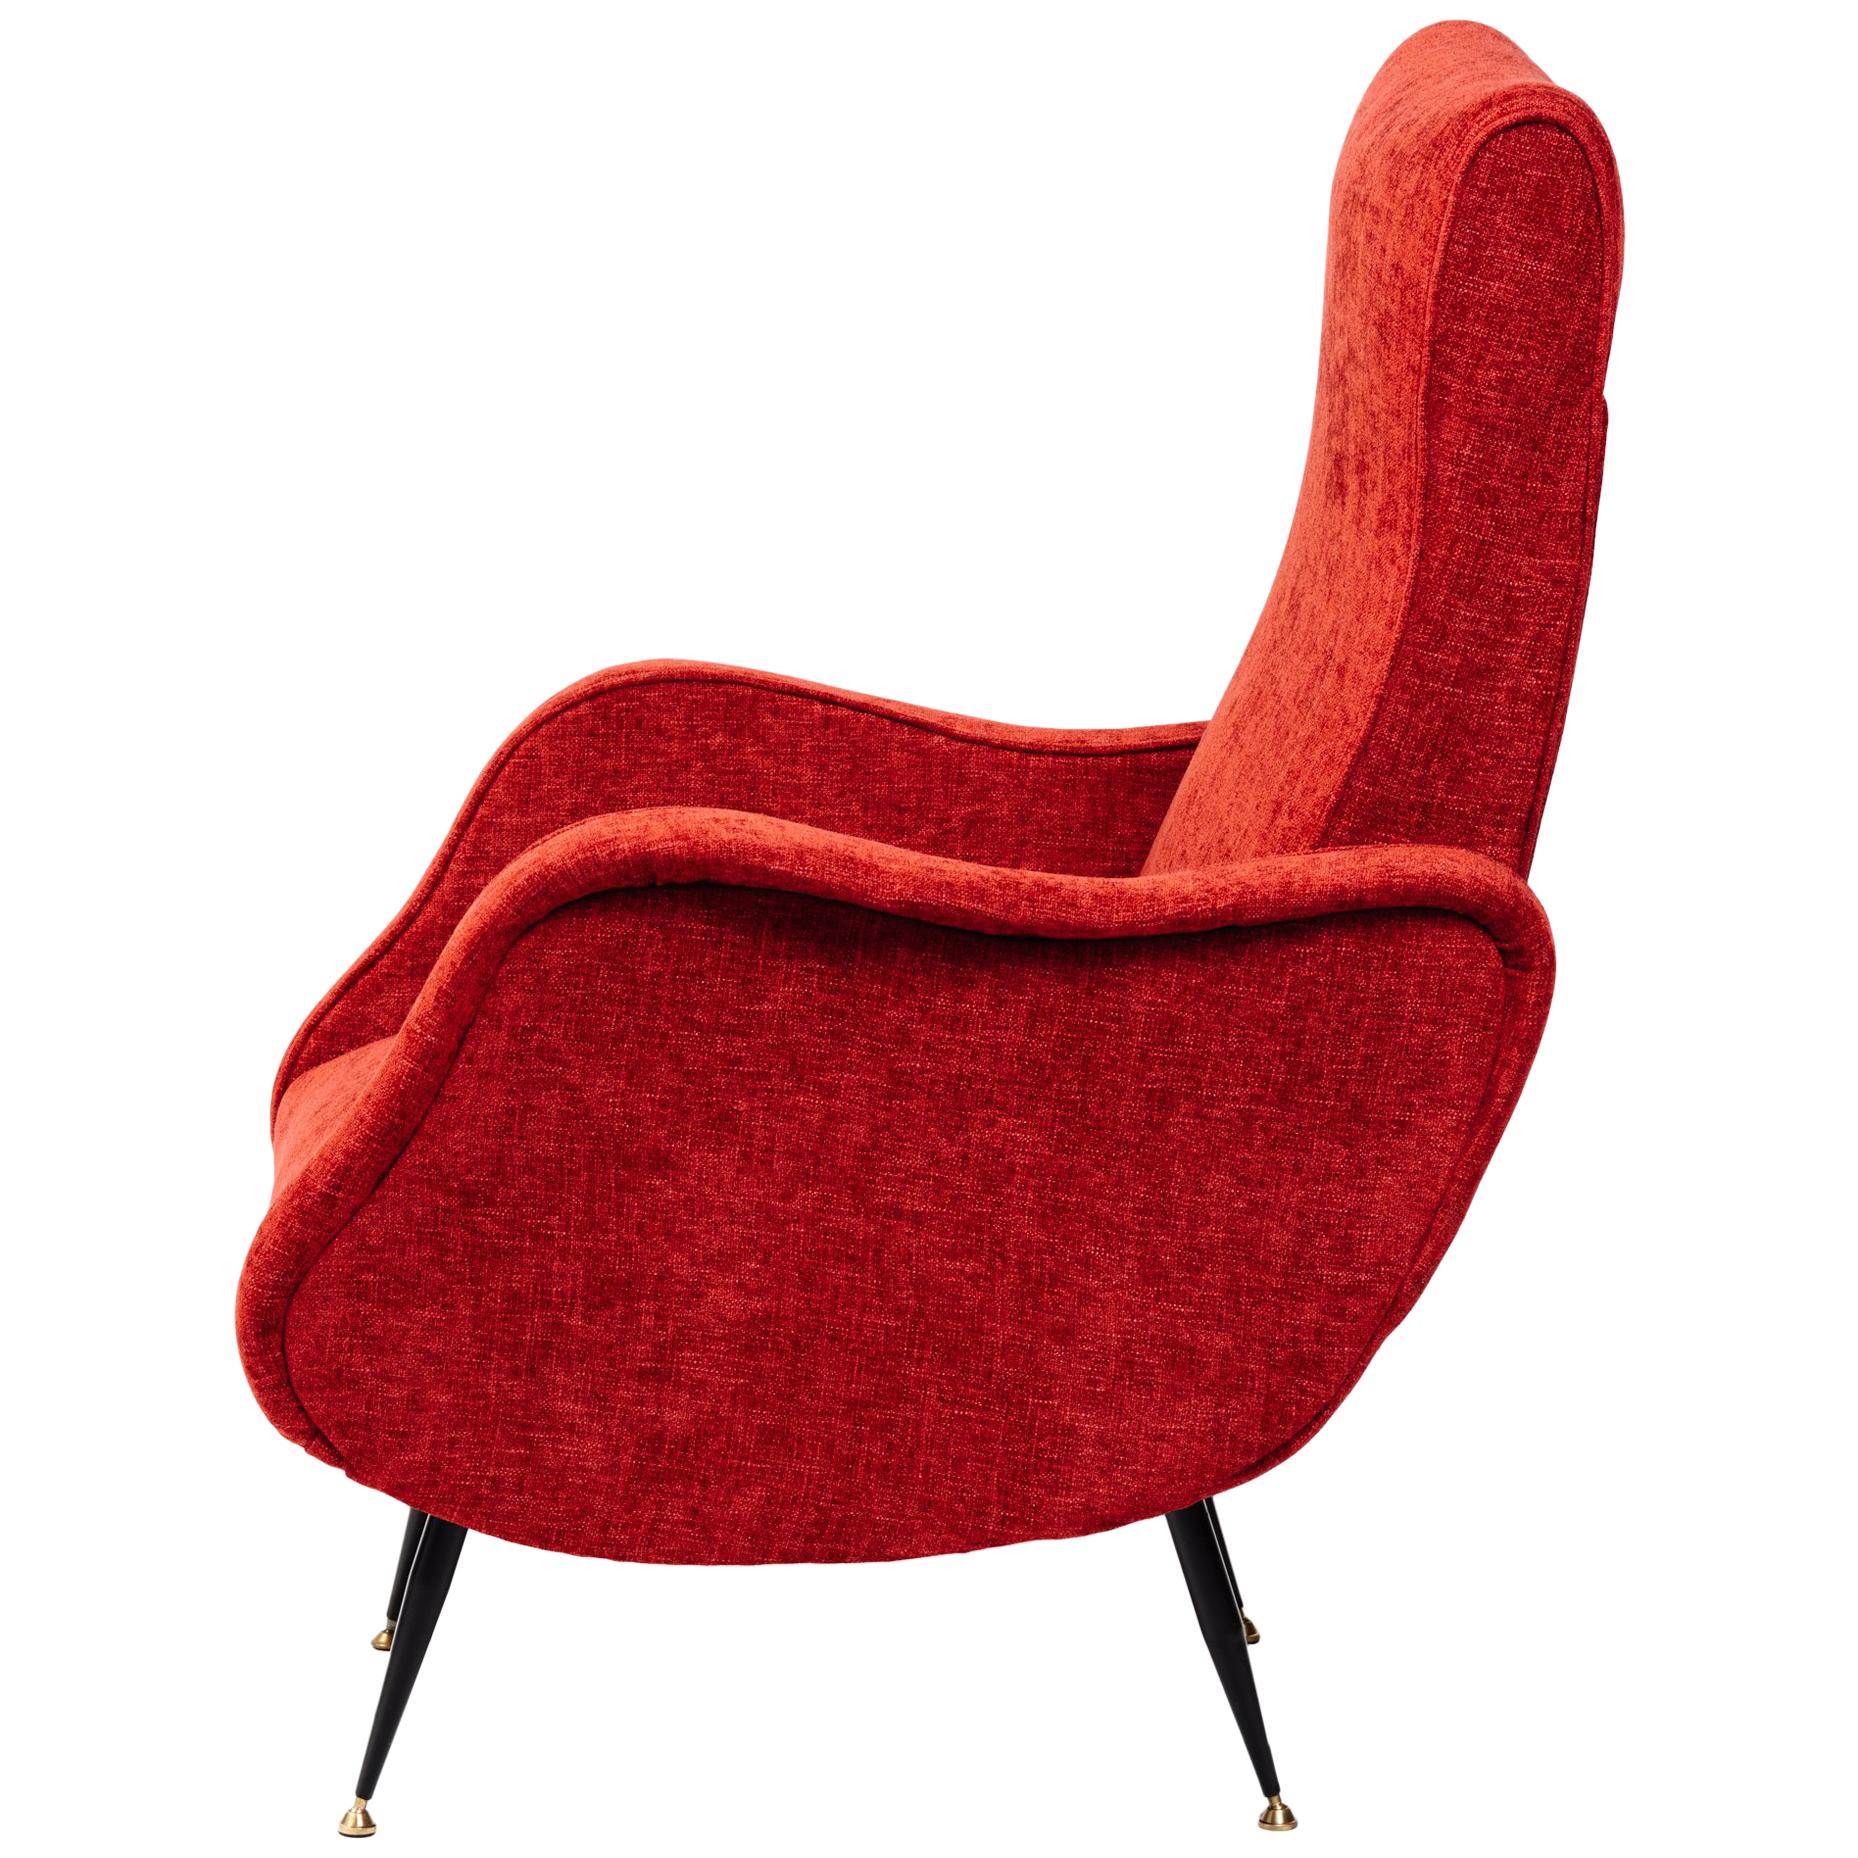 Italian Mid-Century Modern Lounge Chair in Vibrant Woven Red